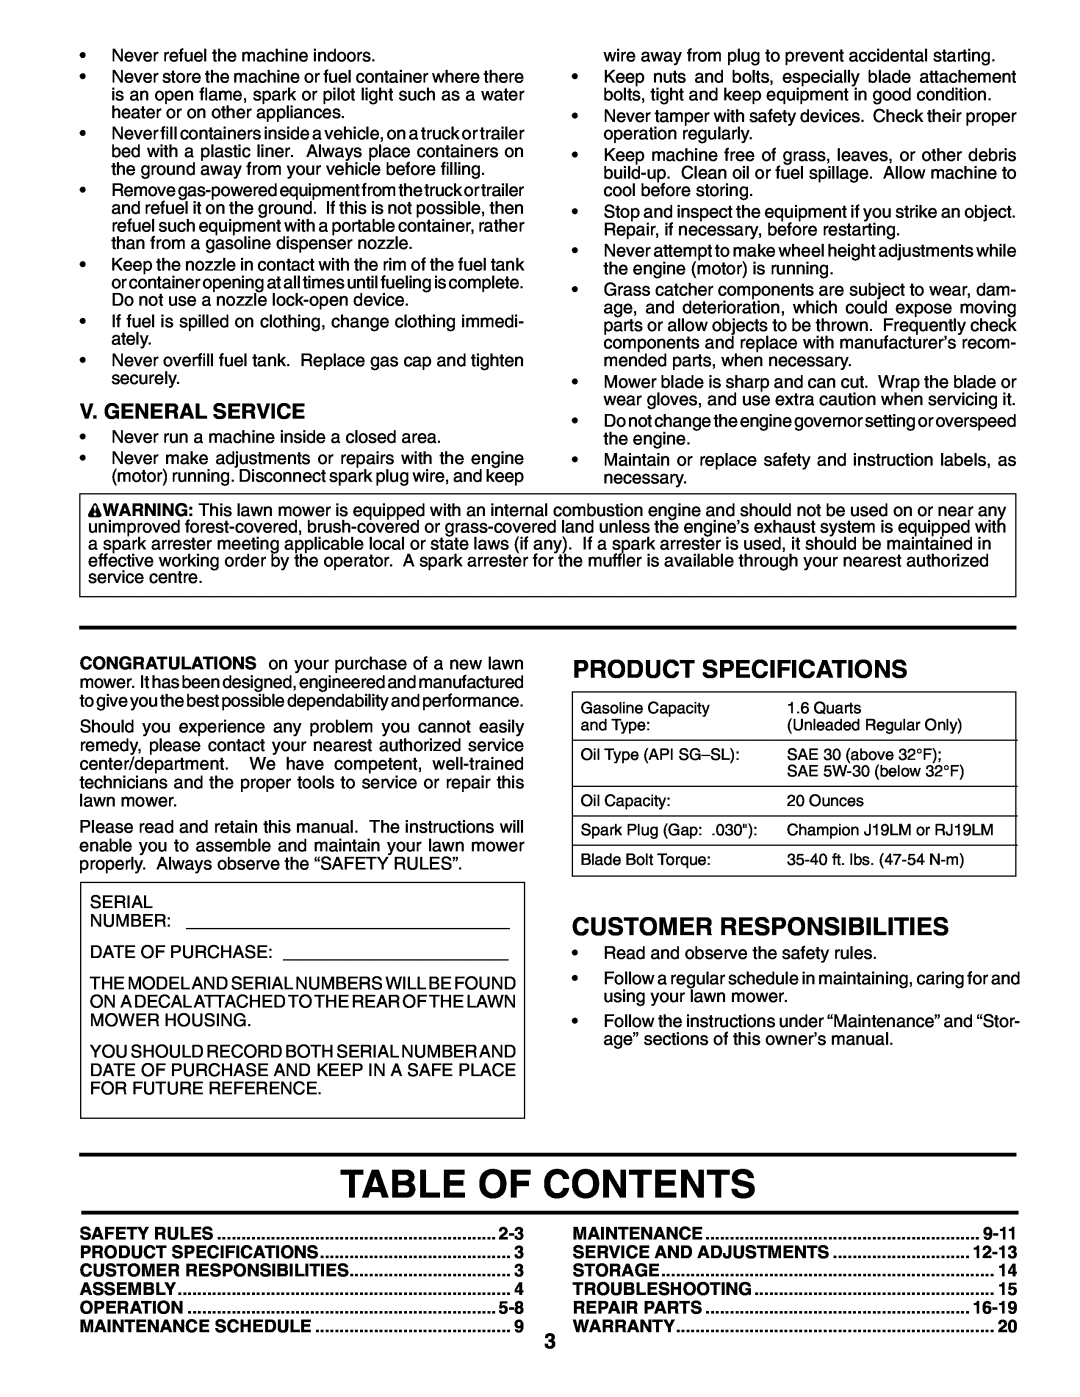 Husqvarna 65021CHV Table Of Contents, Product Specifications, Customer Responsibilities, V. General Service, 9-11, 12-13 